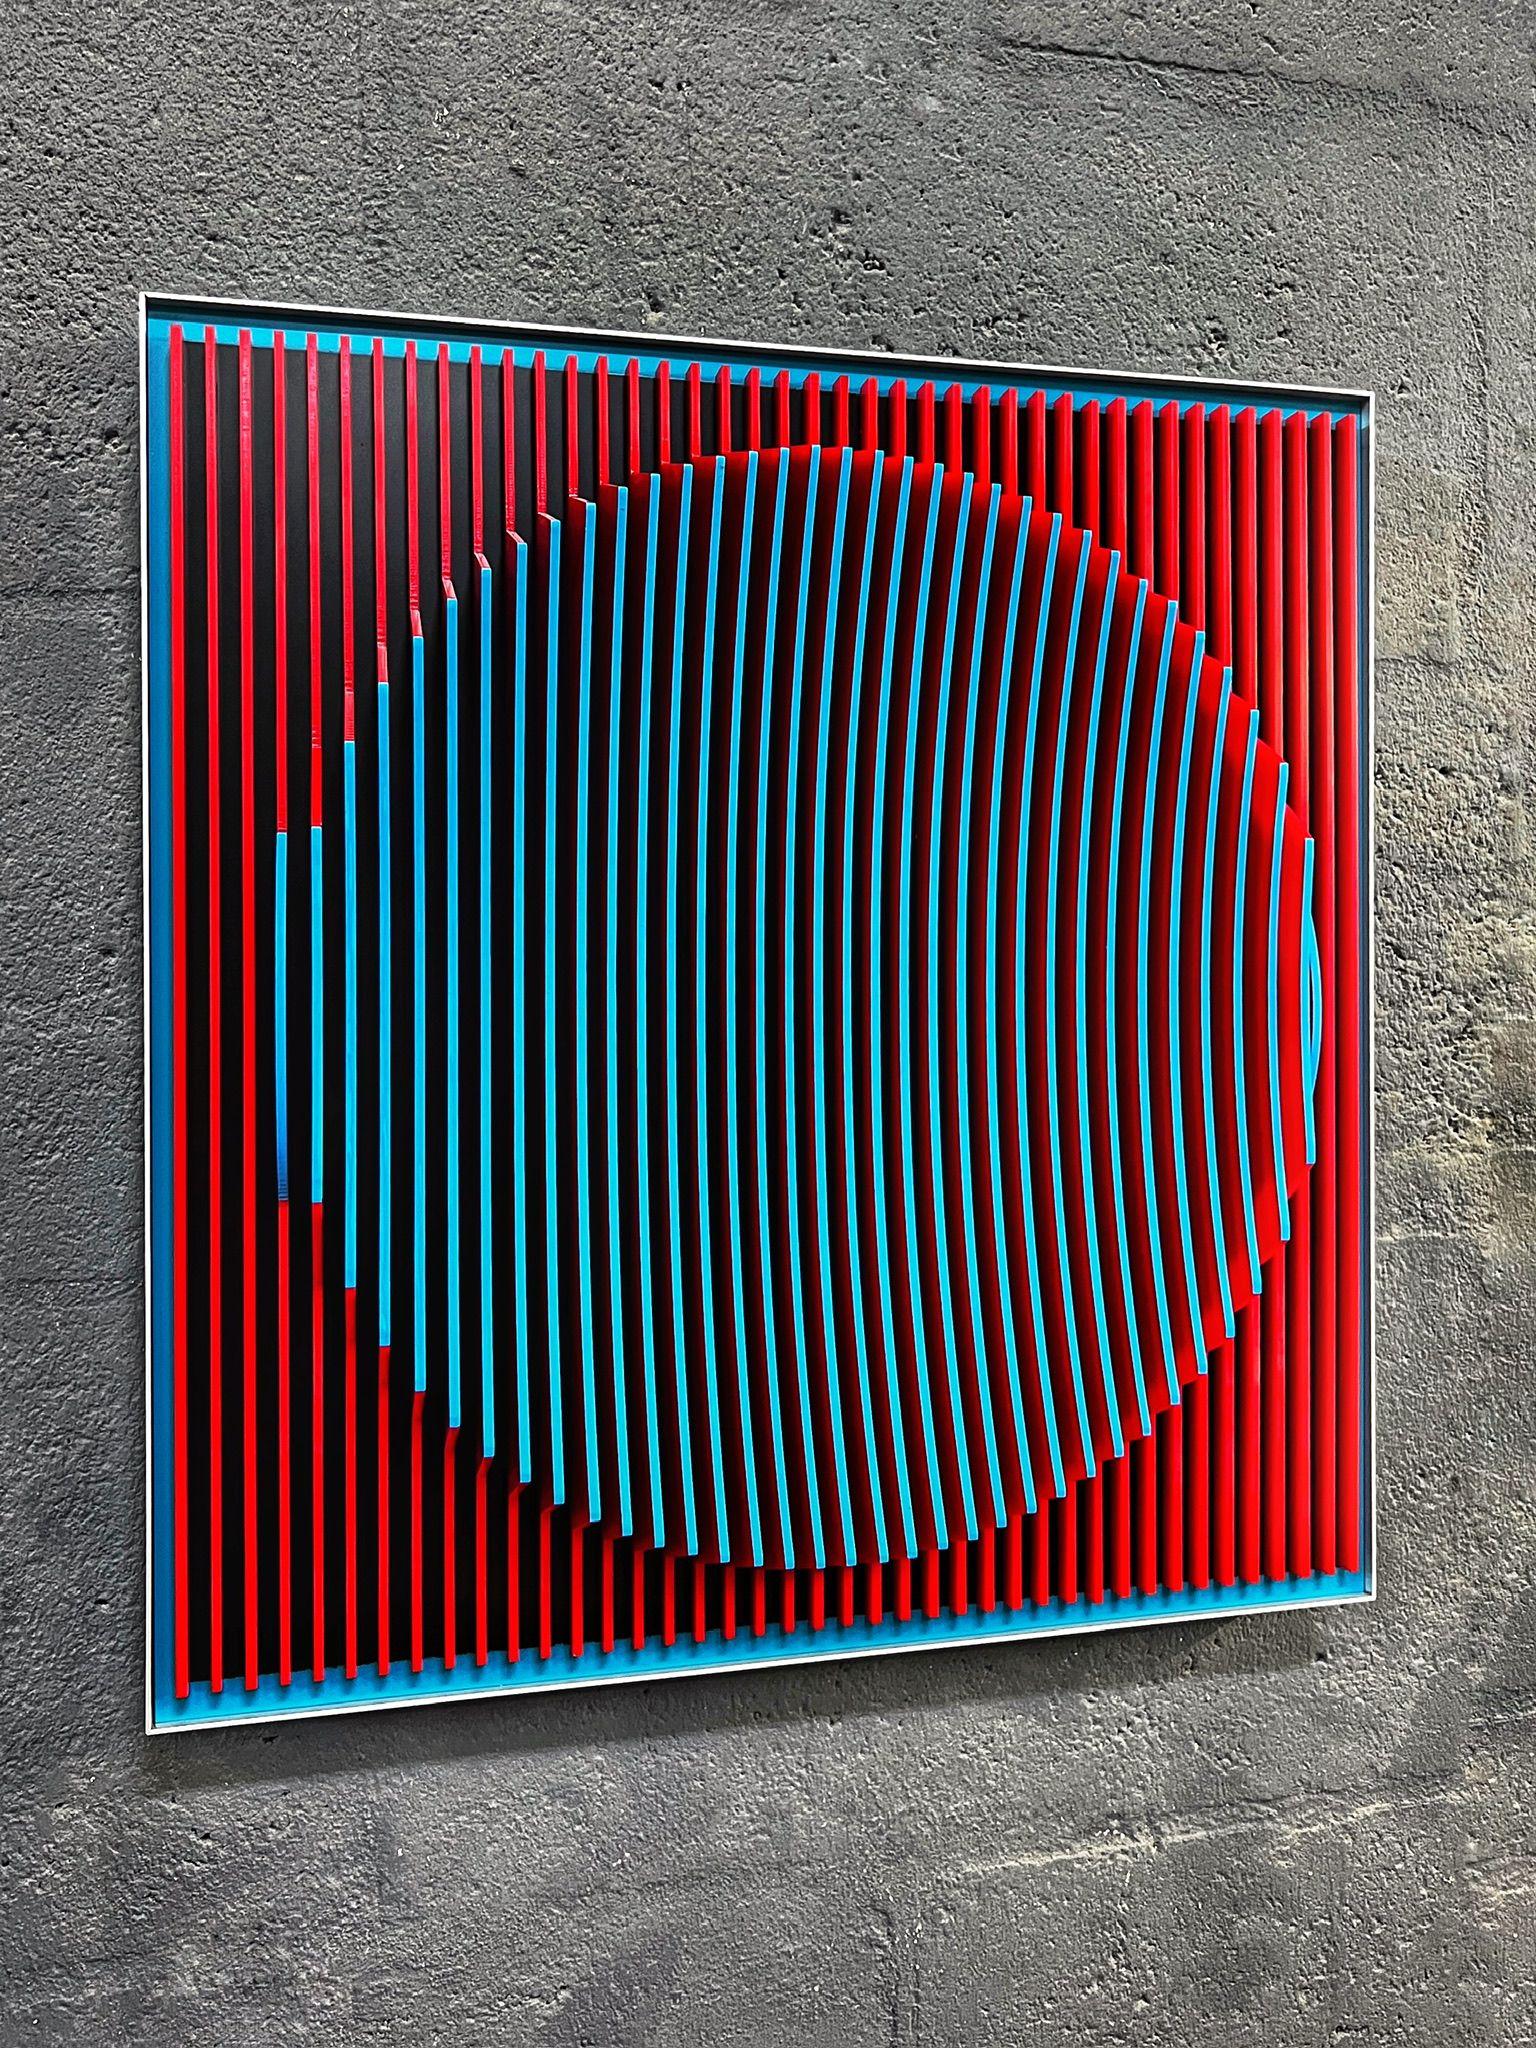 kinetic wall sculptures